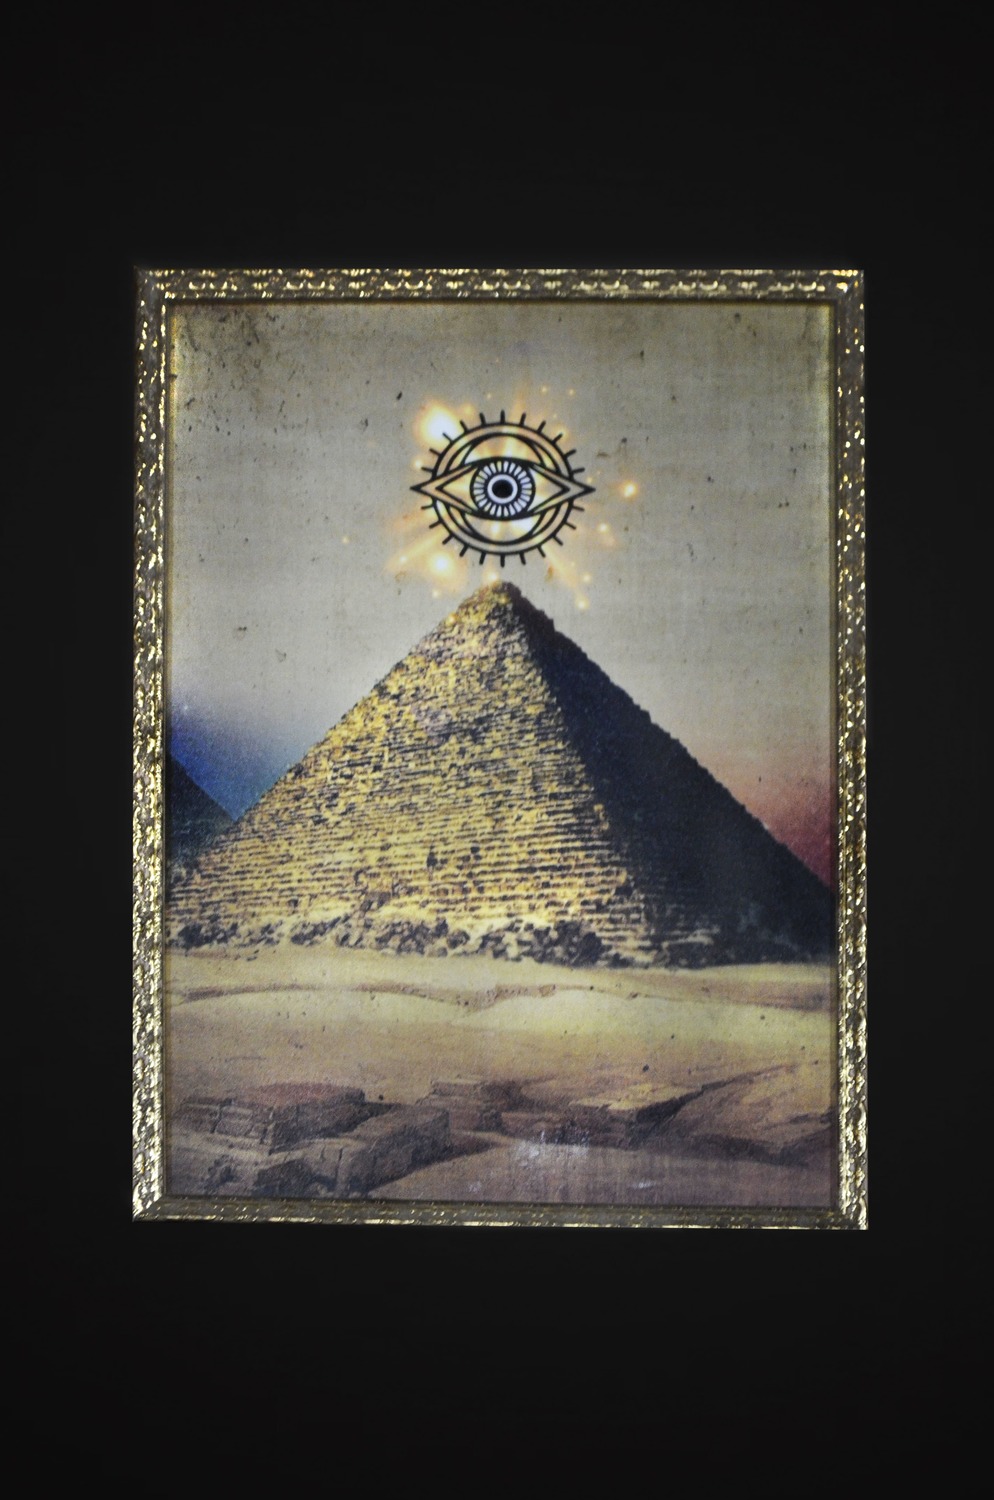 <p>Riddle "Pyramid of Light"<br></p>